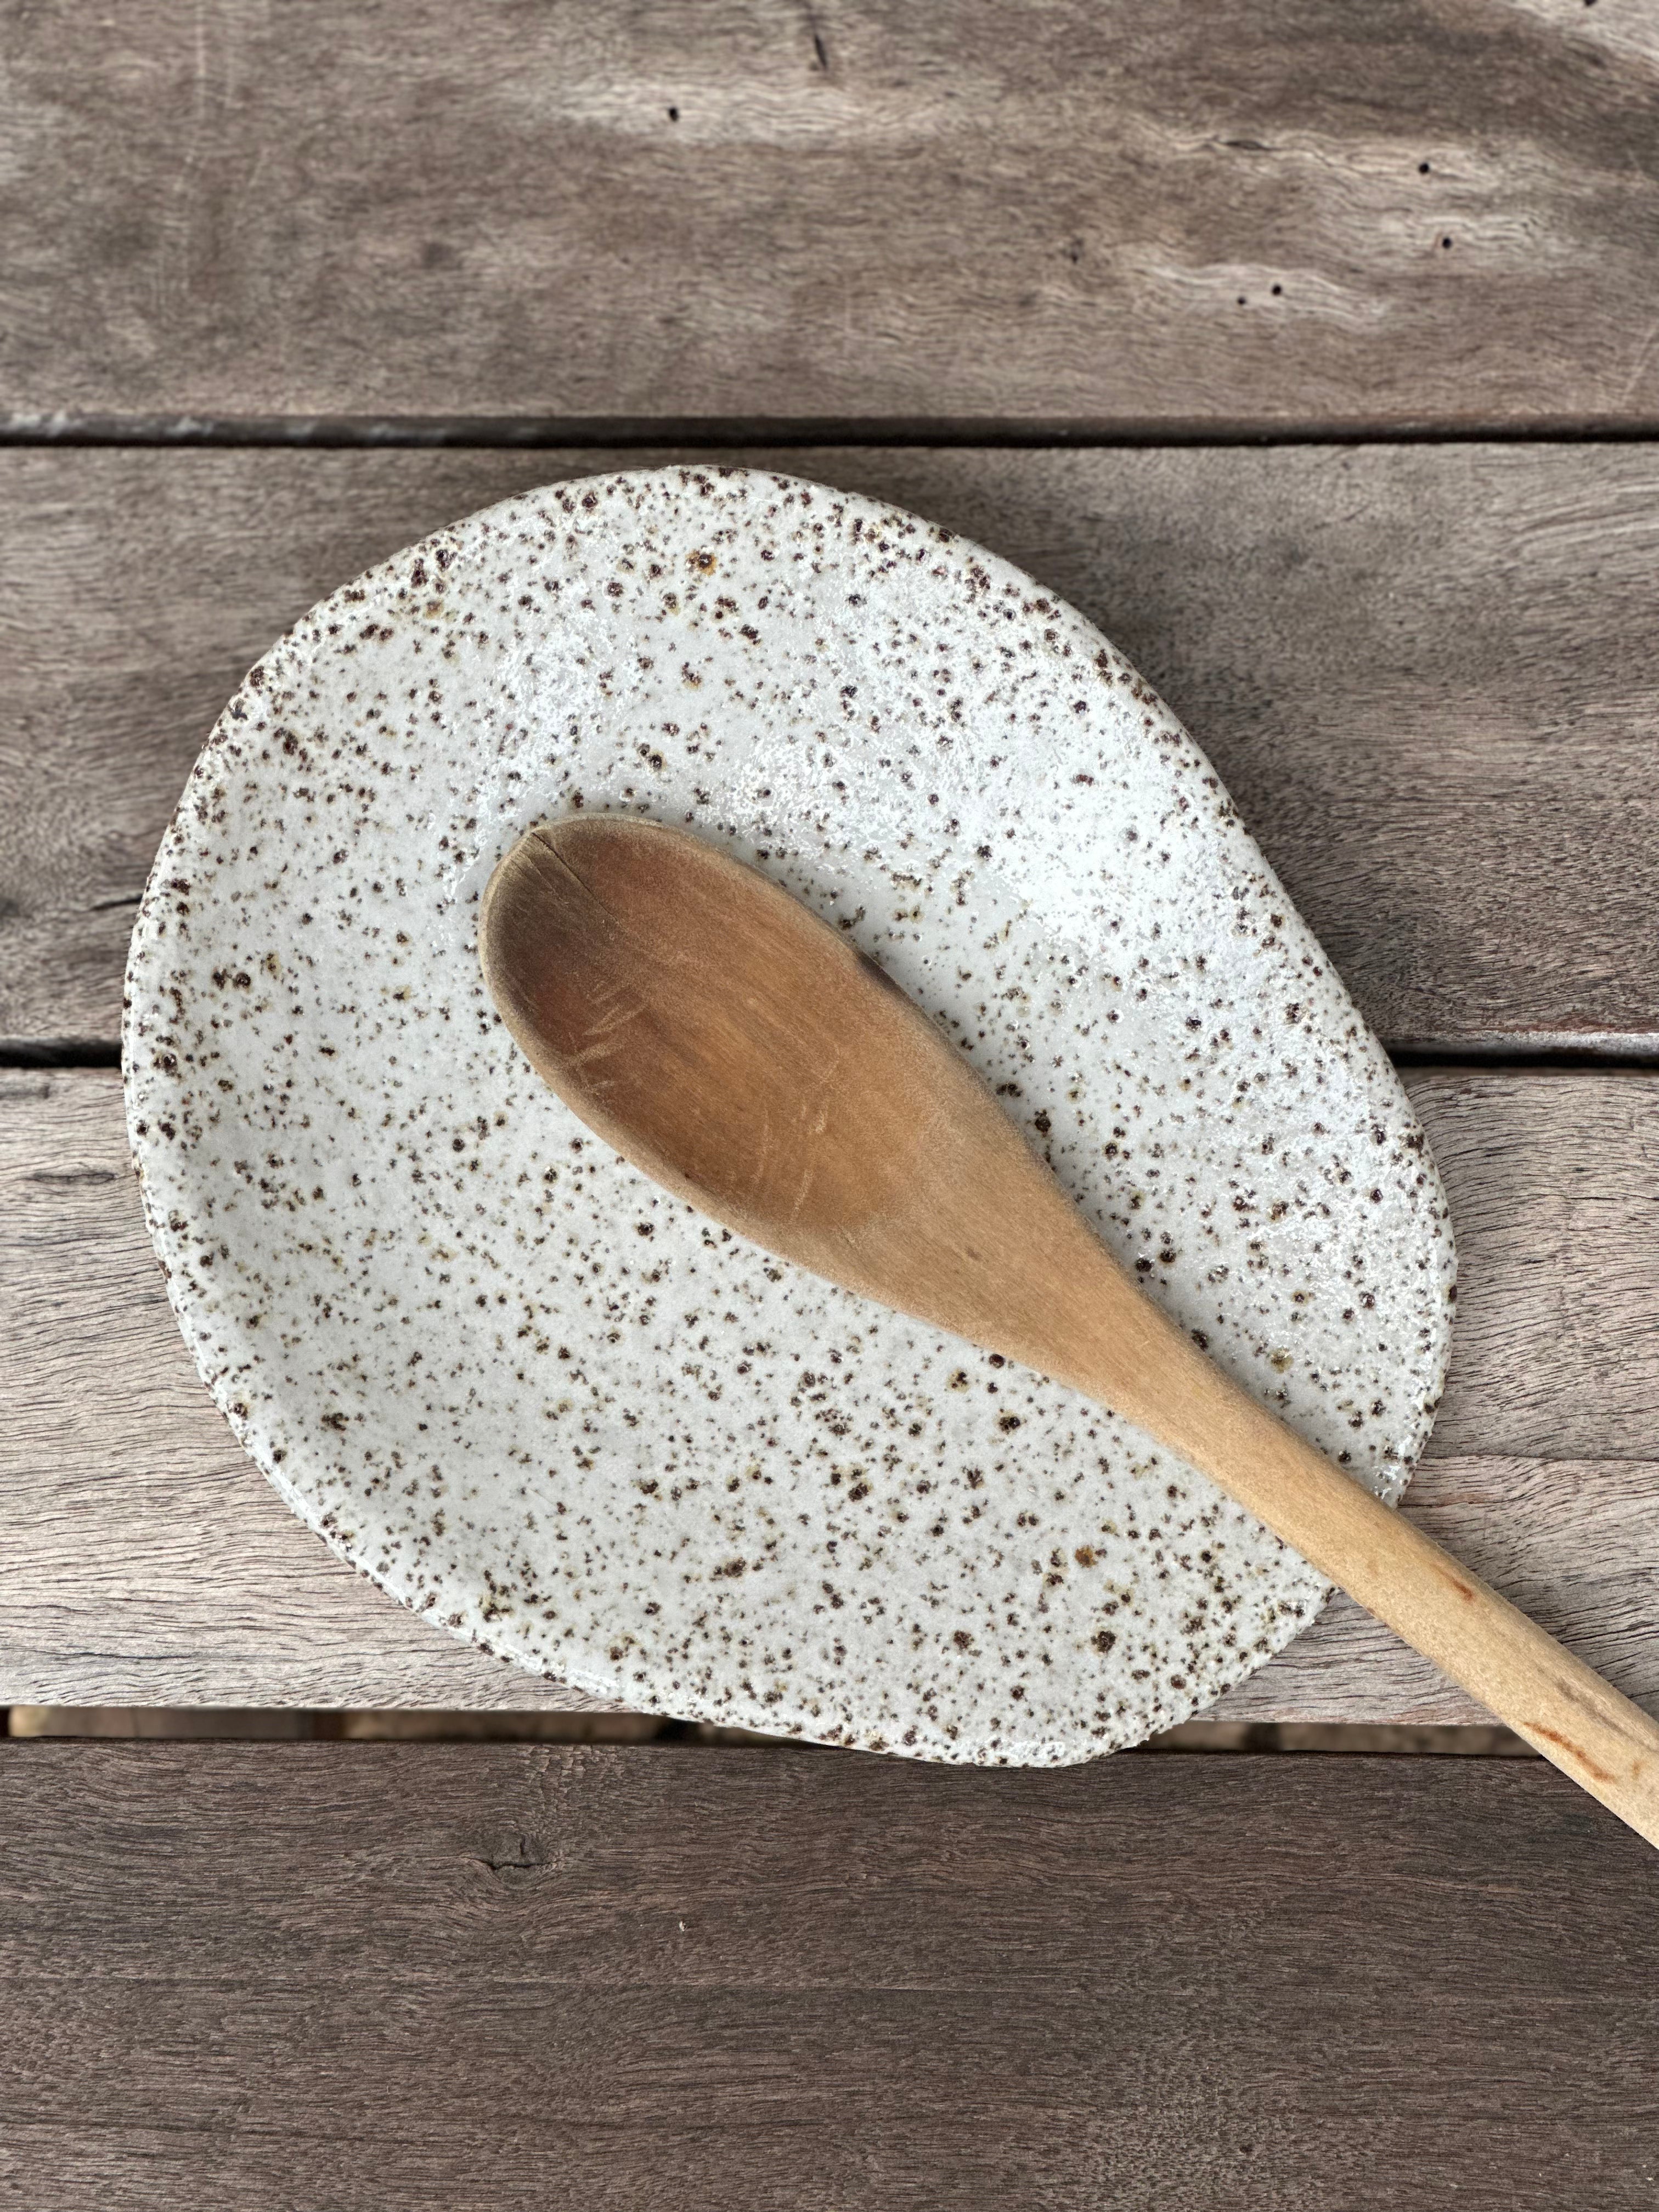 Strong Speckle Spoon Rest